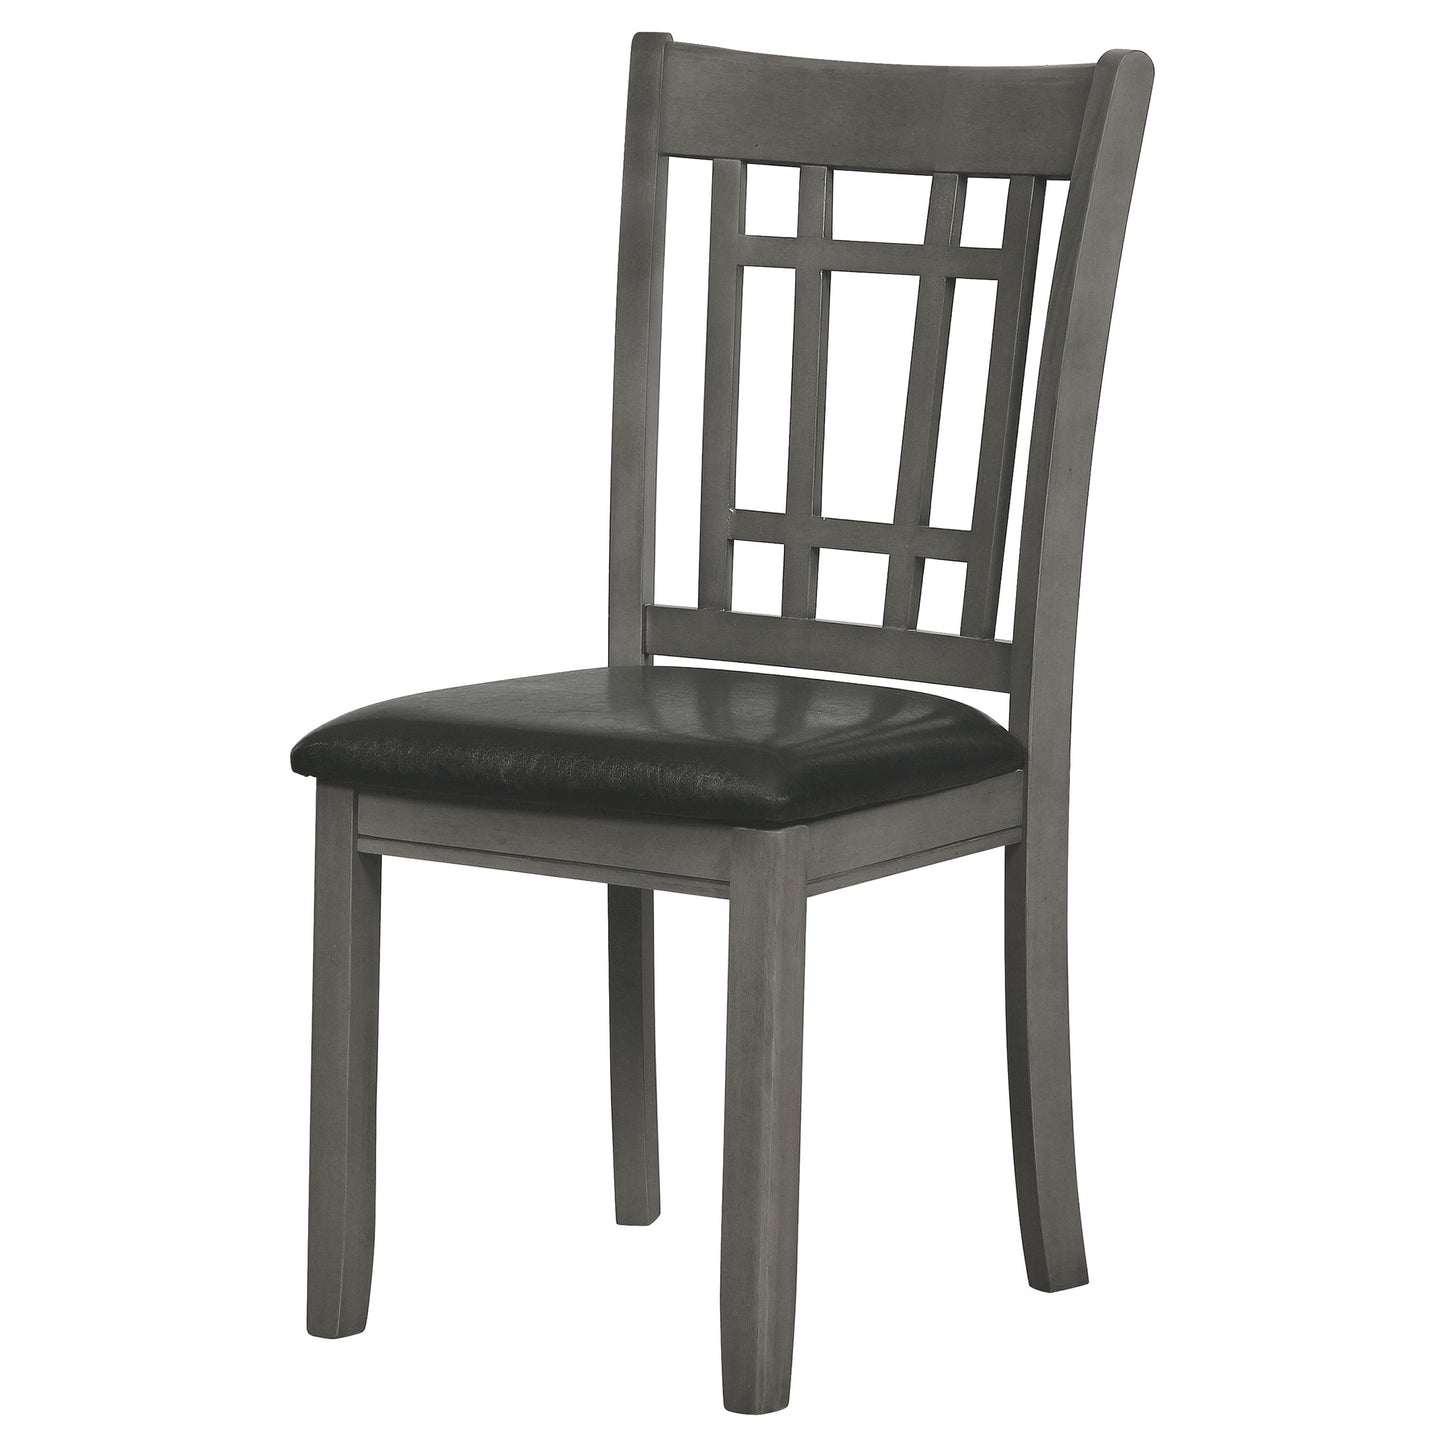 Lavon Padded Dining Side Chairs Medium Grey and Black (Set of 2)